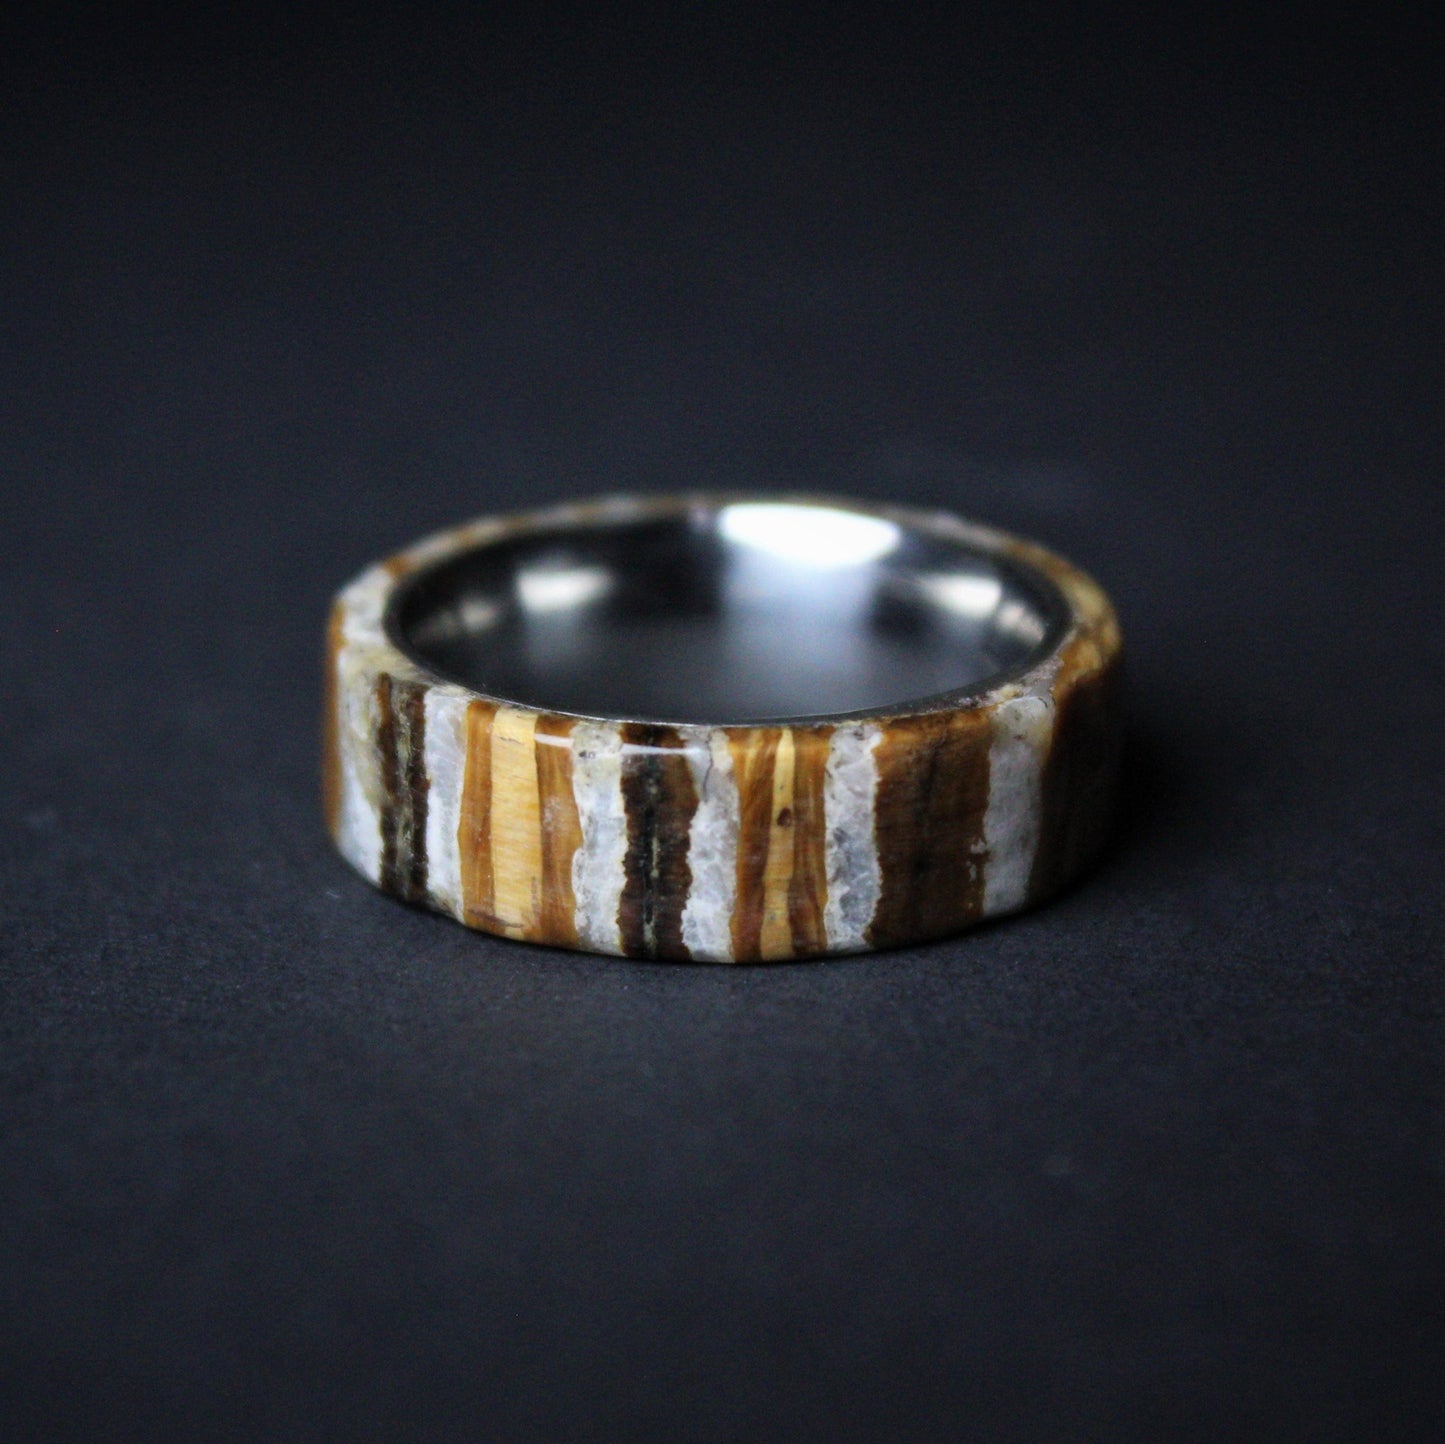 Mammoth Tooth Ring with Stainless Steel Core